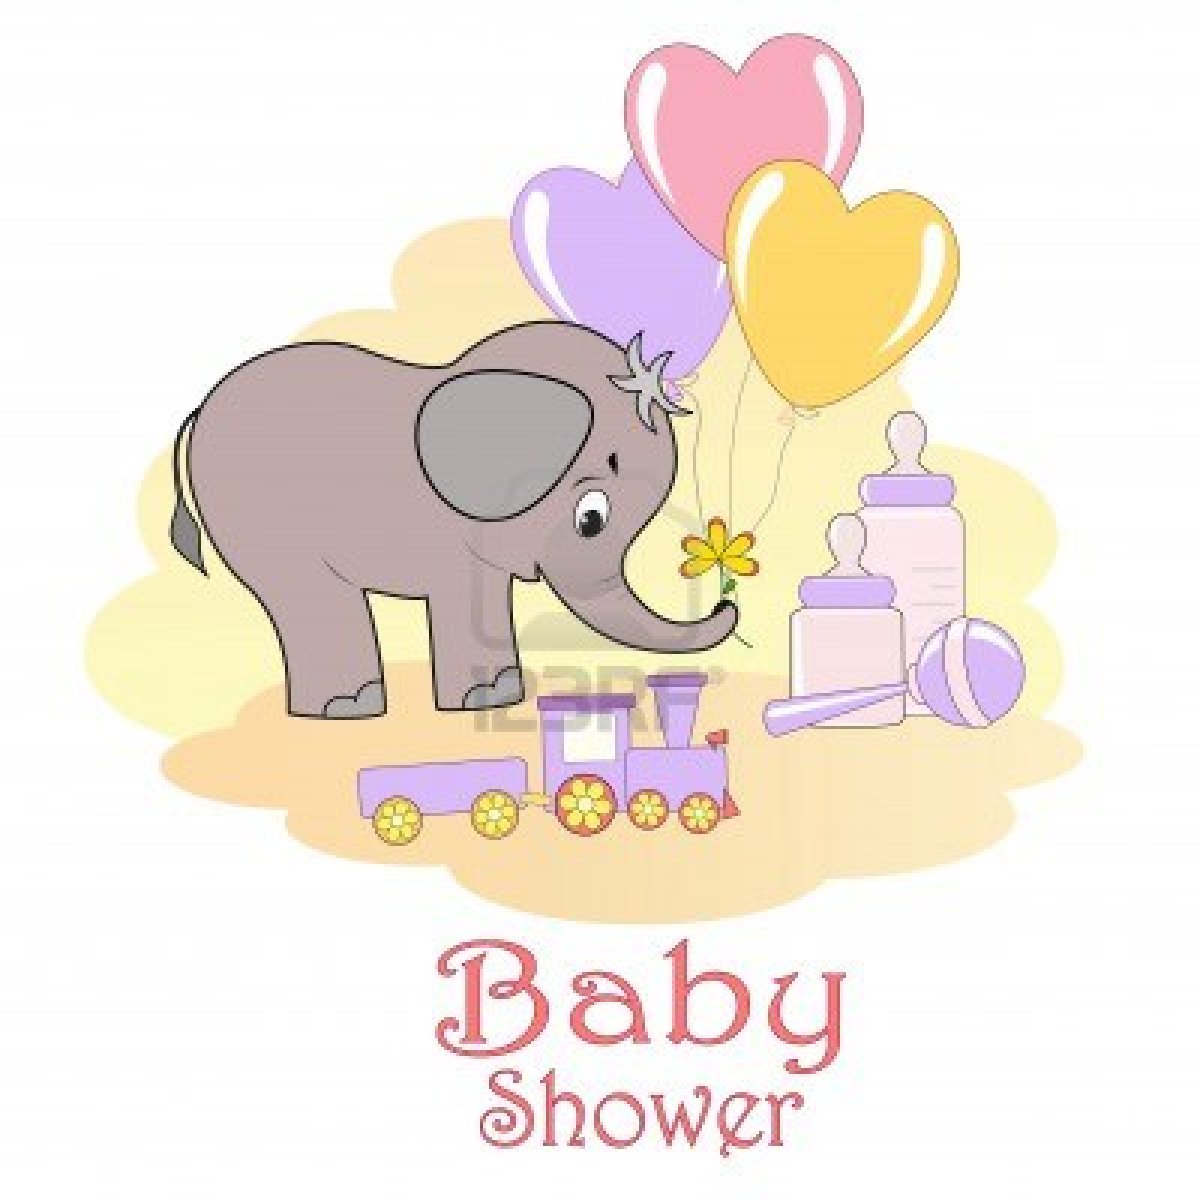 Baby Shower Party Supplies Favors Decorations Games